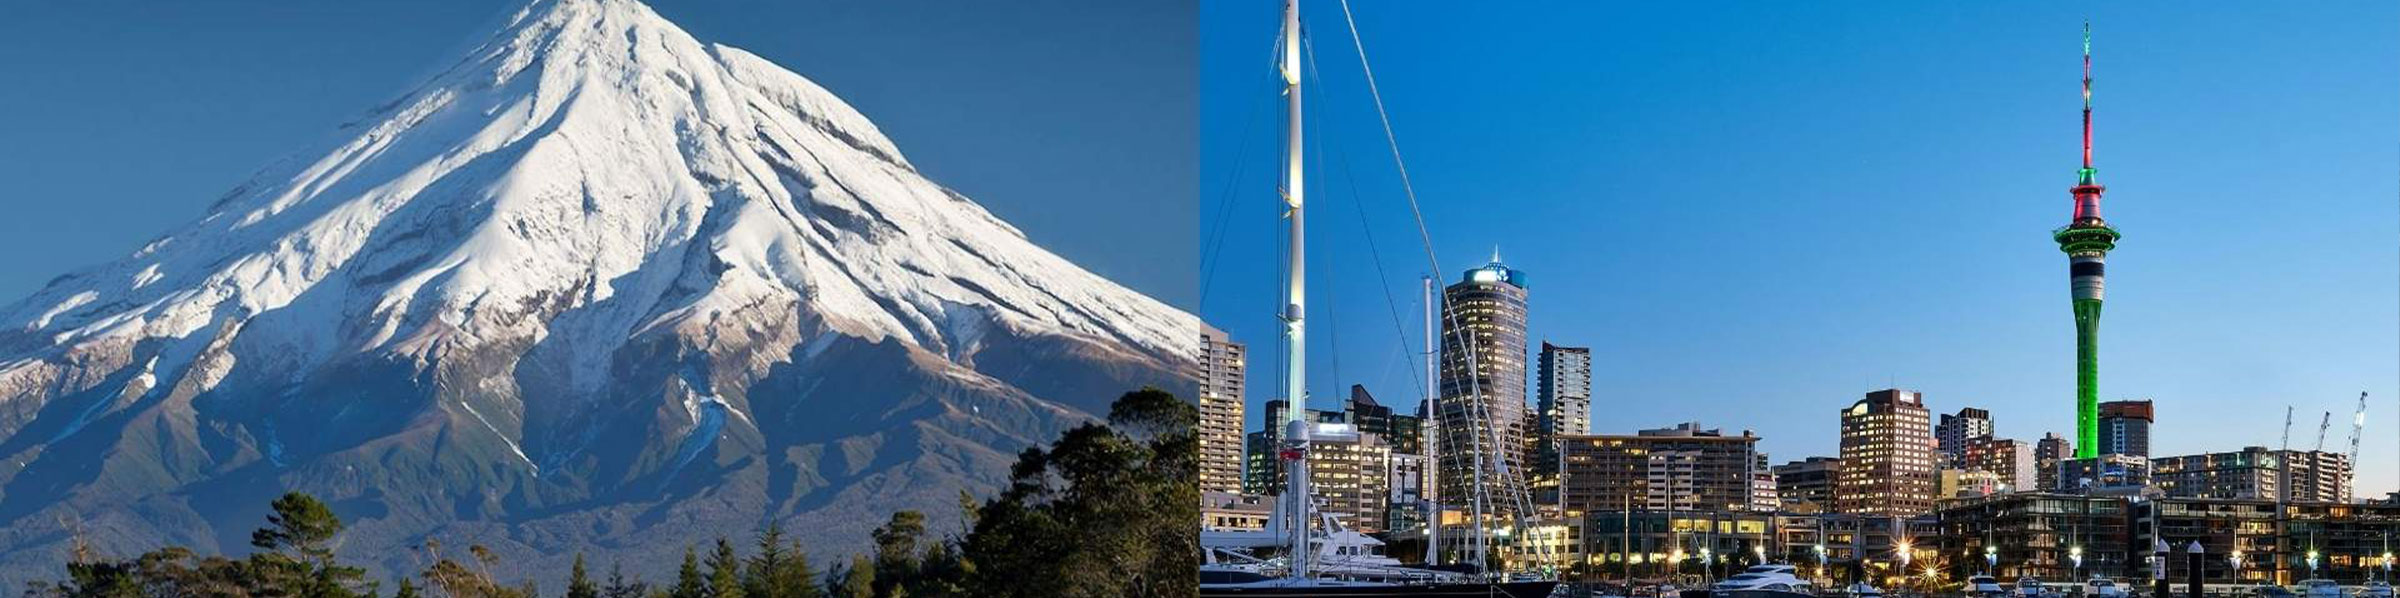 Left picture is a mountain, and right picture is a city skyline view.